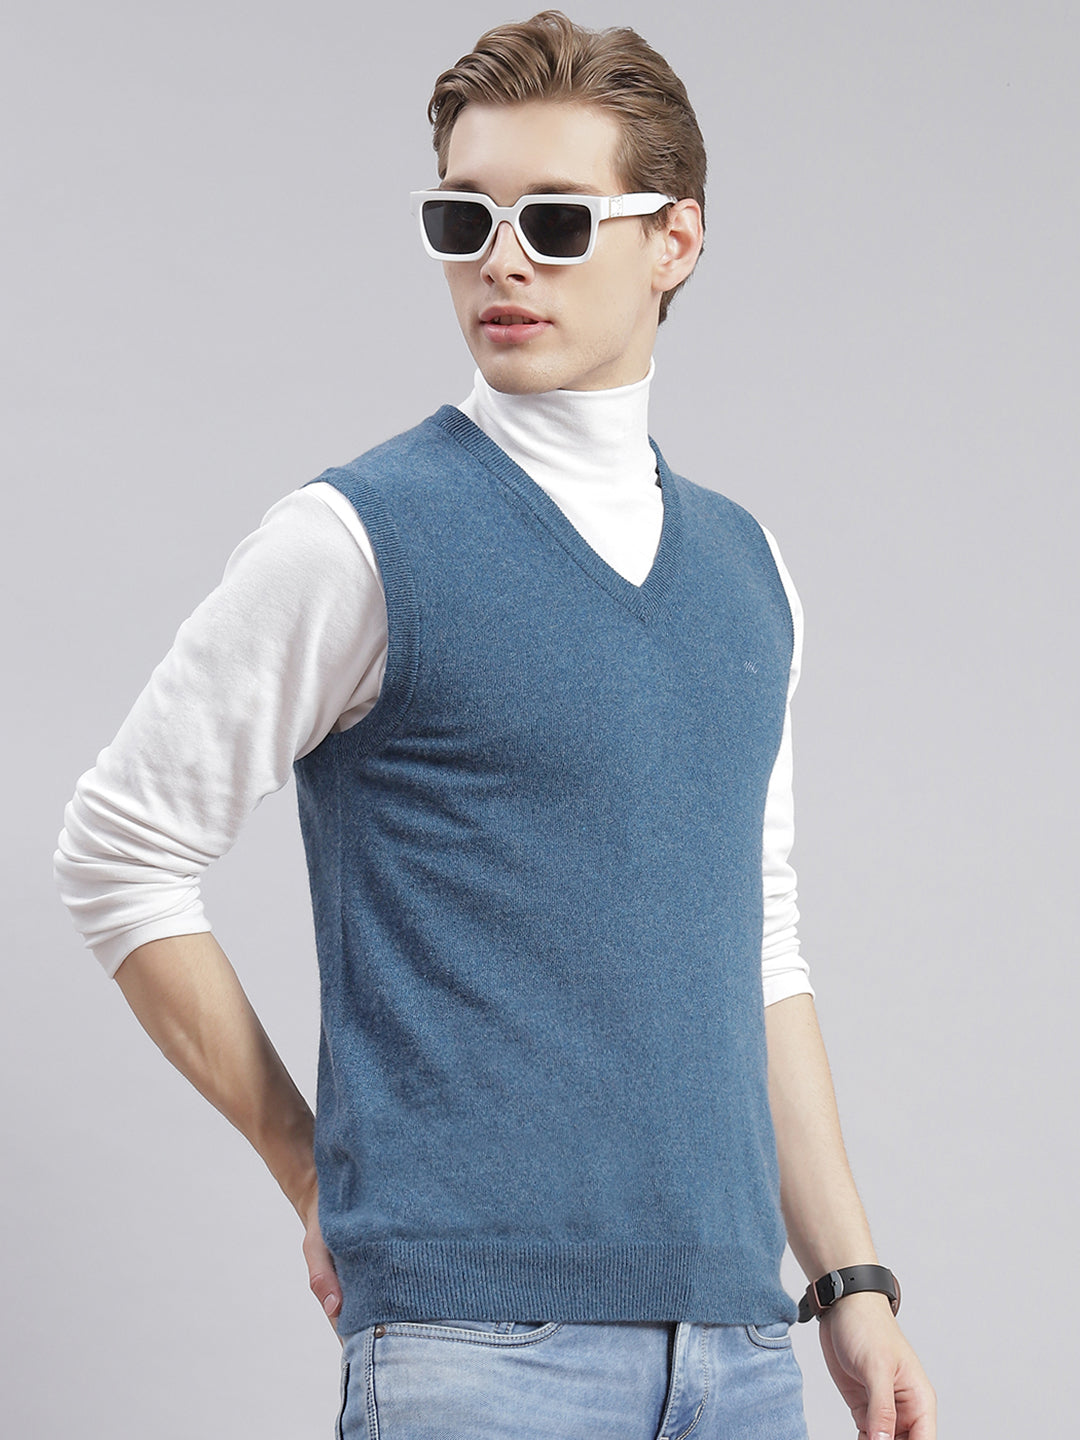 Men Blue Solid V Neck Sleeveless Sweaters/Pullovers